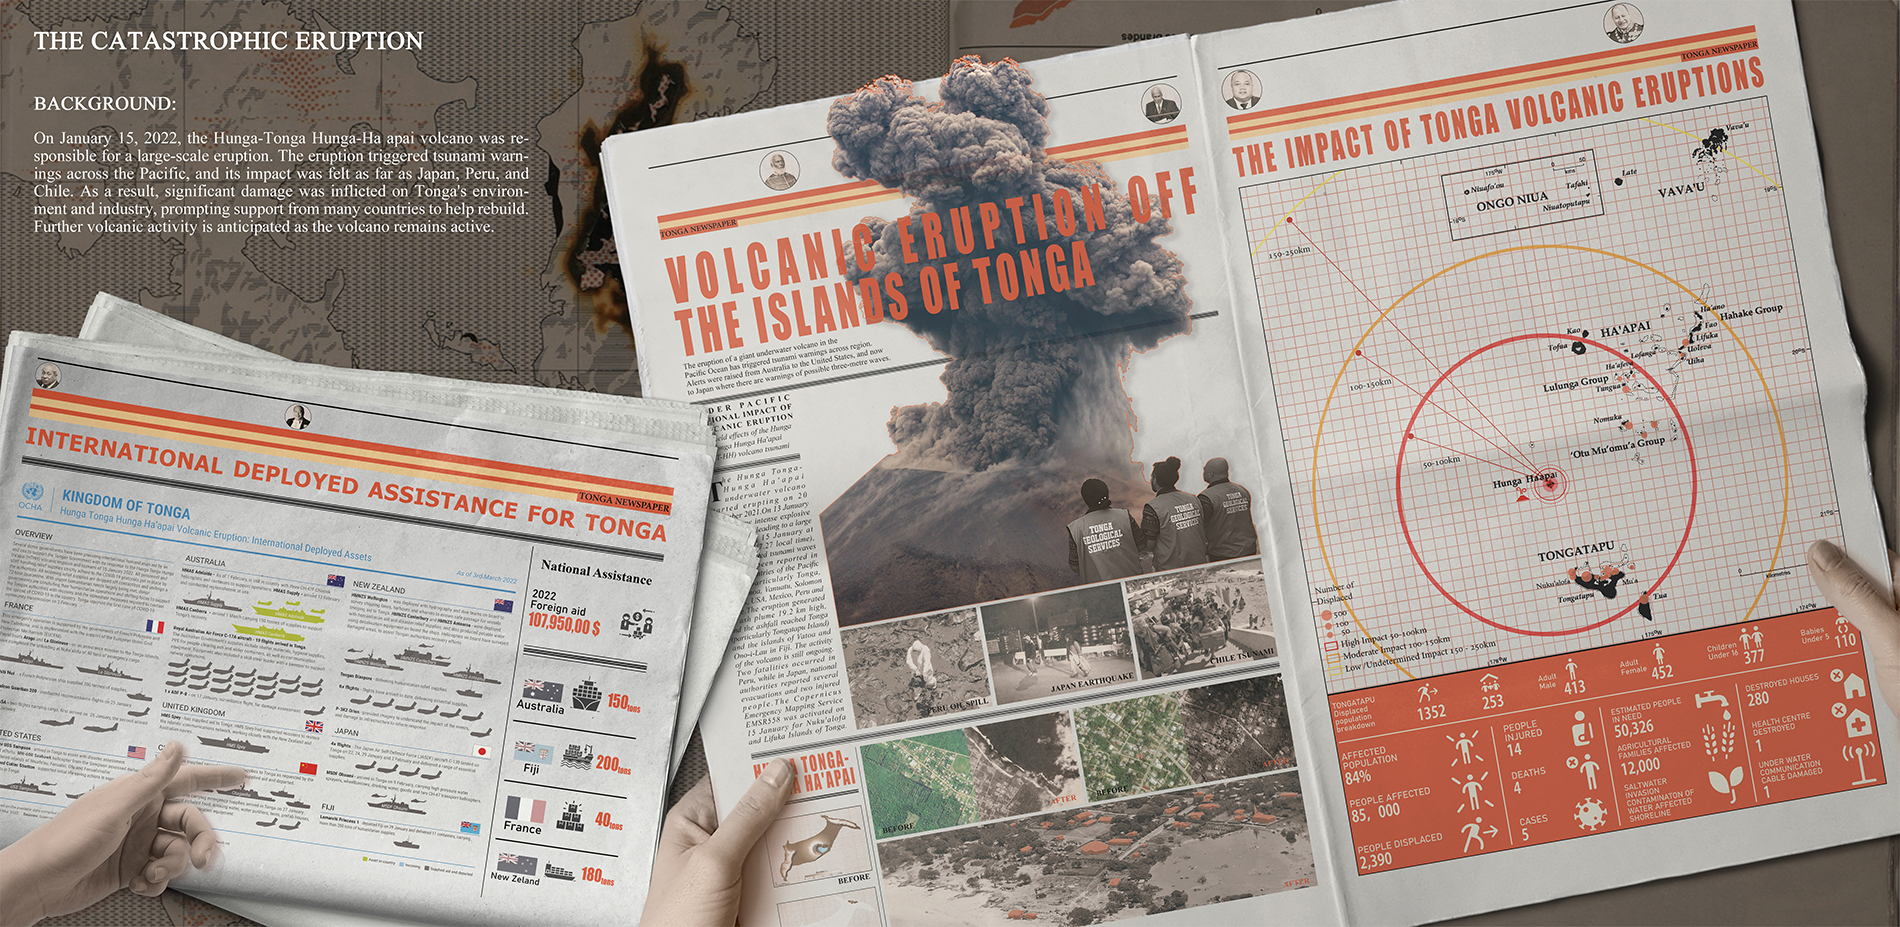 Volcanic disasters and the potential risks